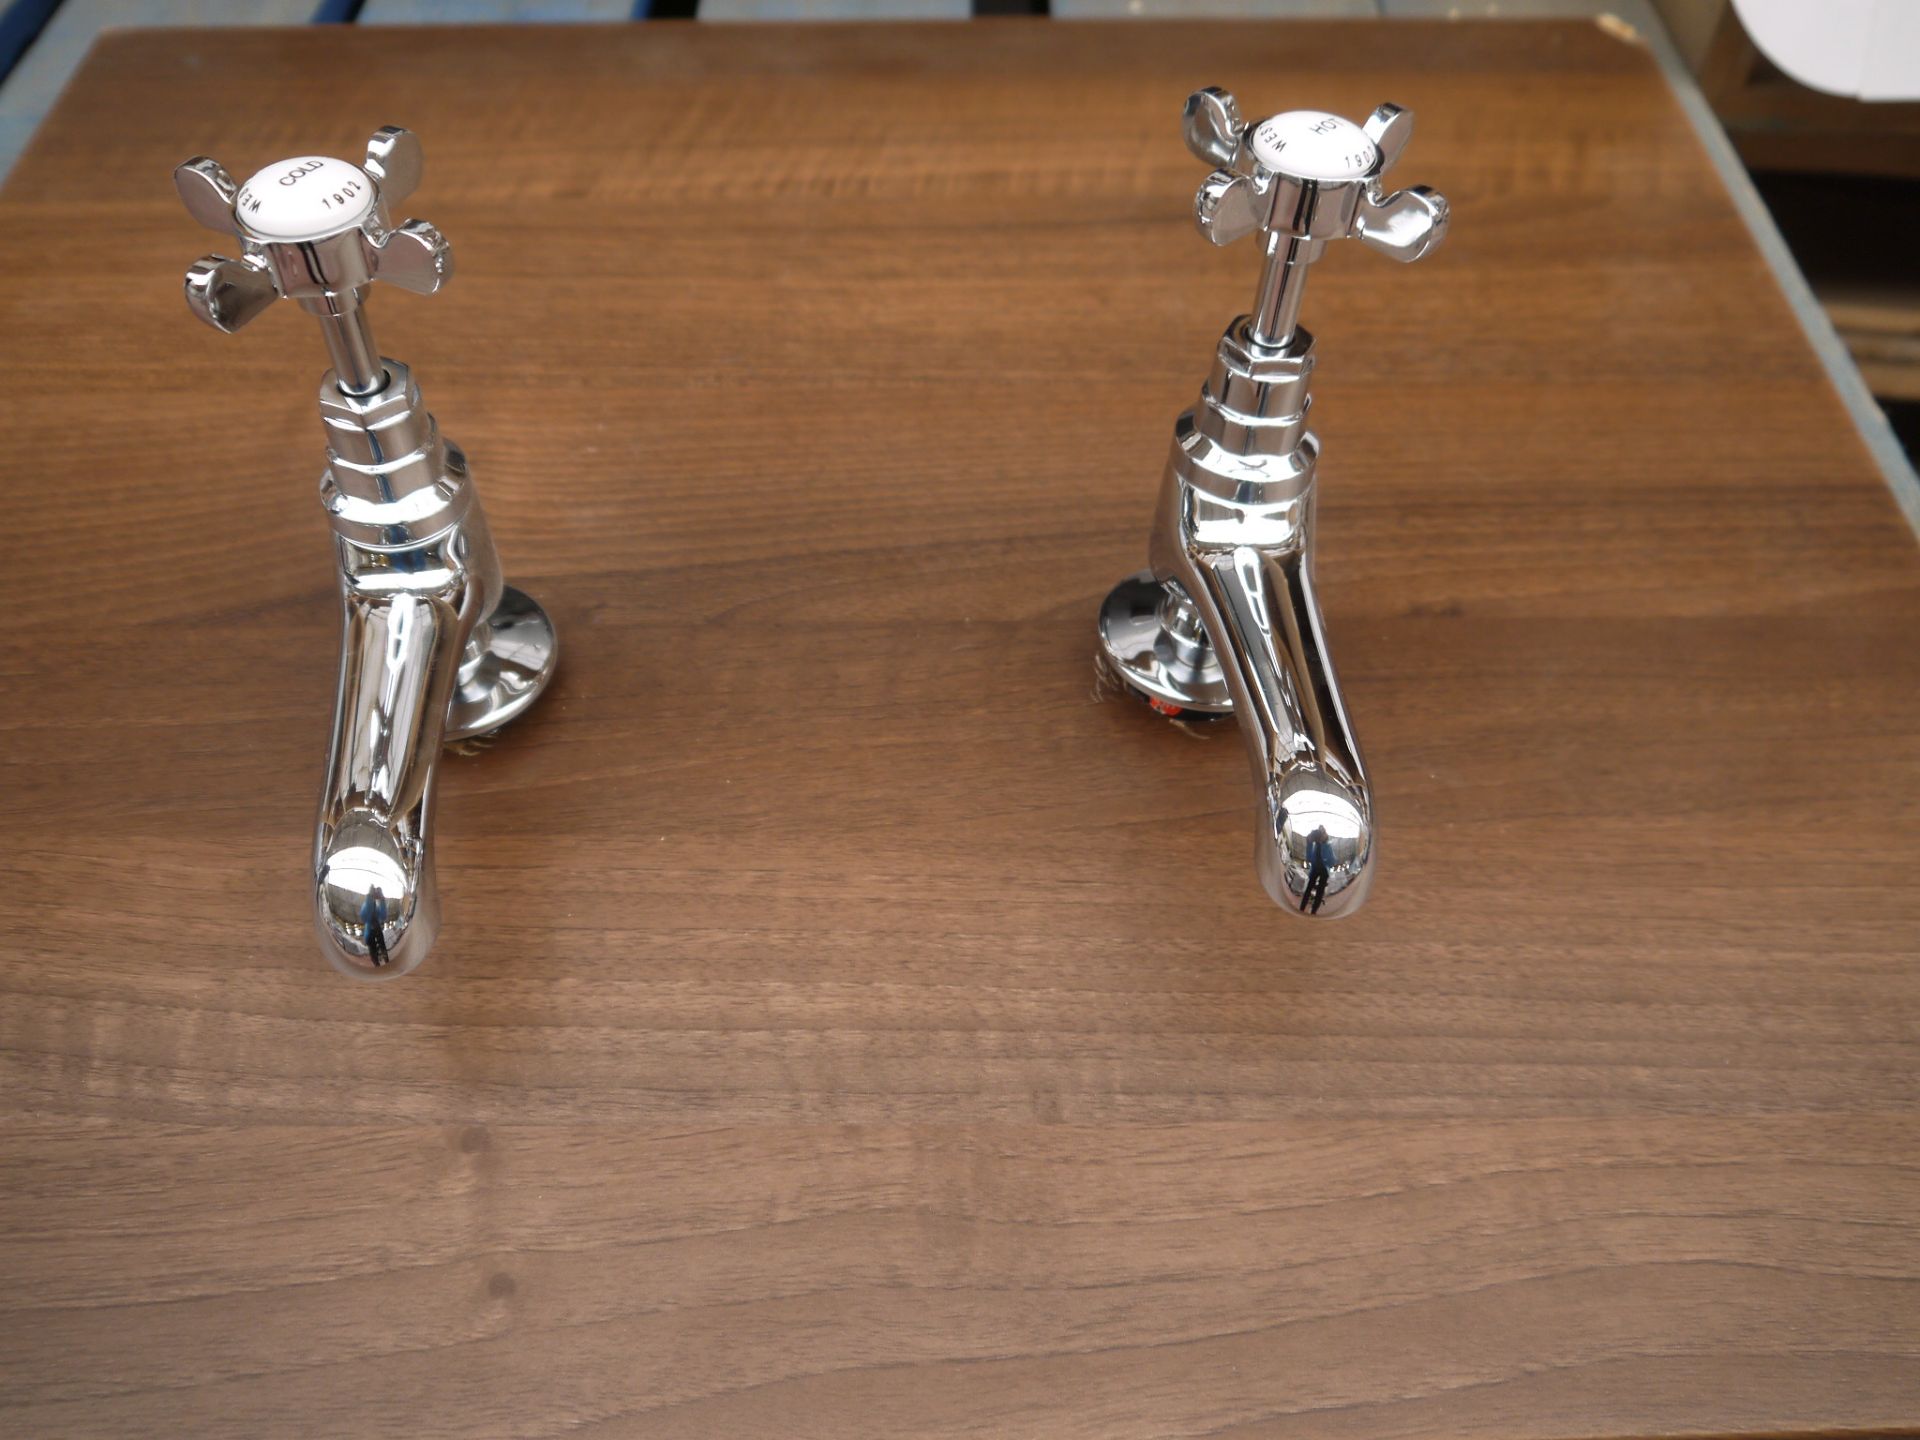 Jacuzzi Westminster Basin taps, new and boxed